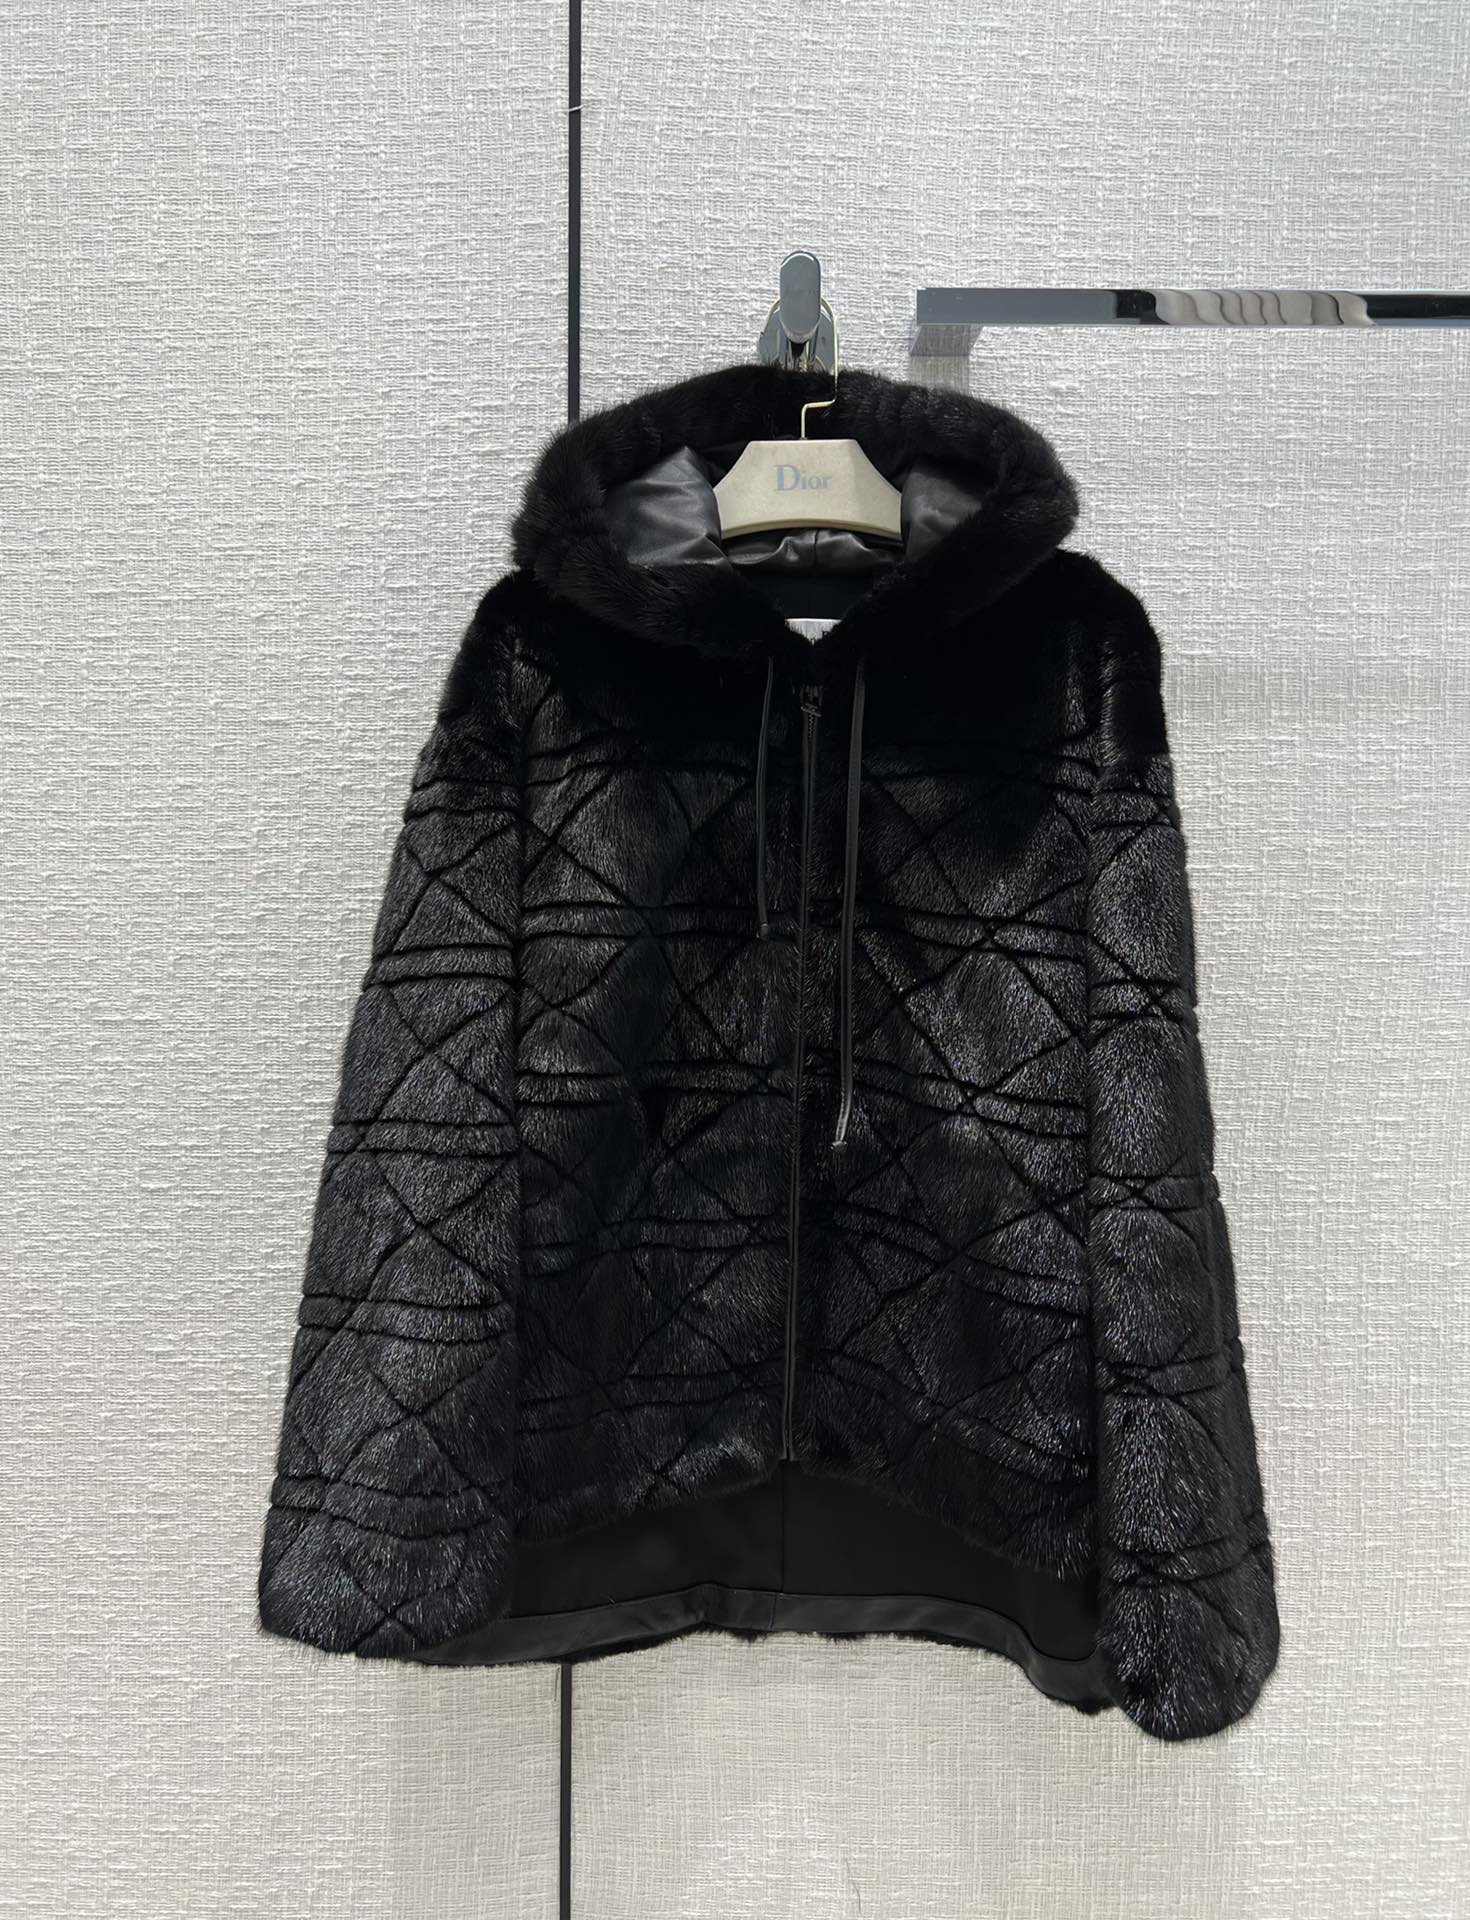 Dior Clothing Coats & Jackets Genuine Leather Velvet Fall/Winter Collection Hooded Top